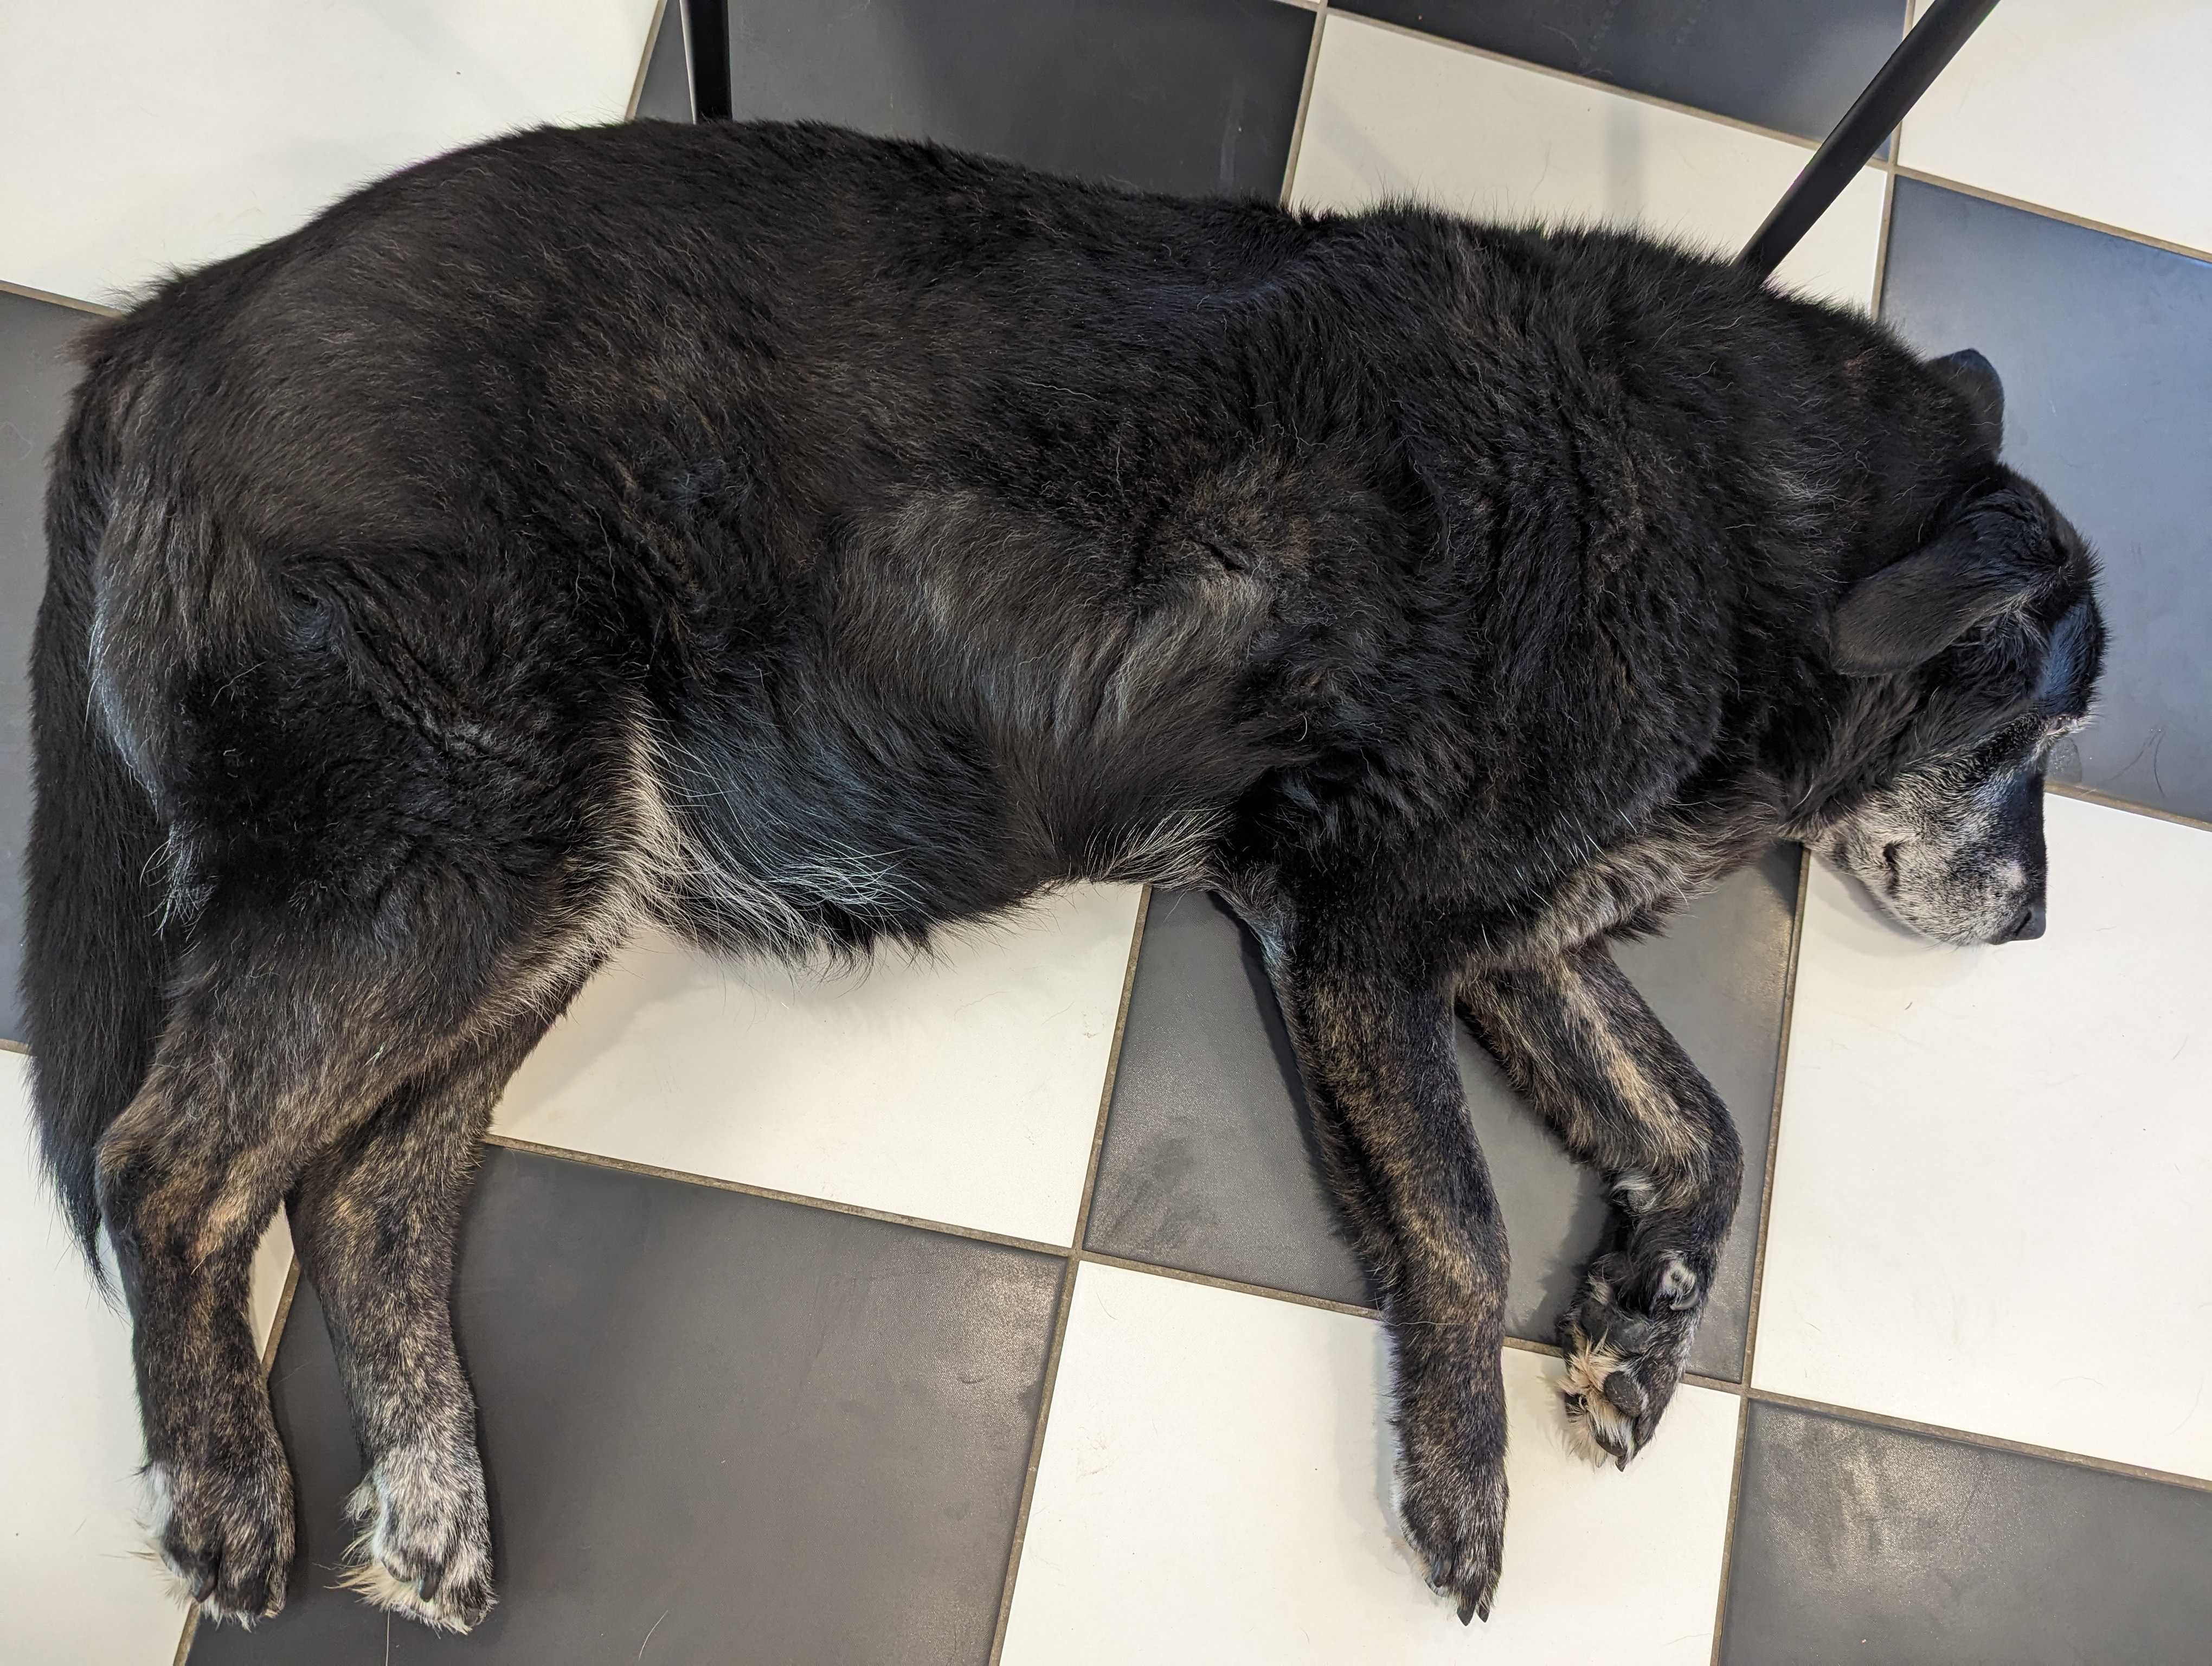 black lab dog lying on side with belly that resembles a potbelly. This is a common symptom for dogs with Cushing's Disease.